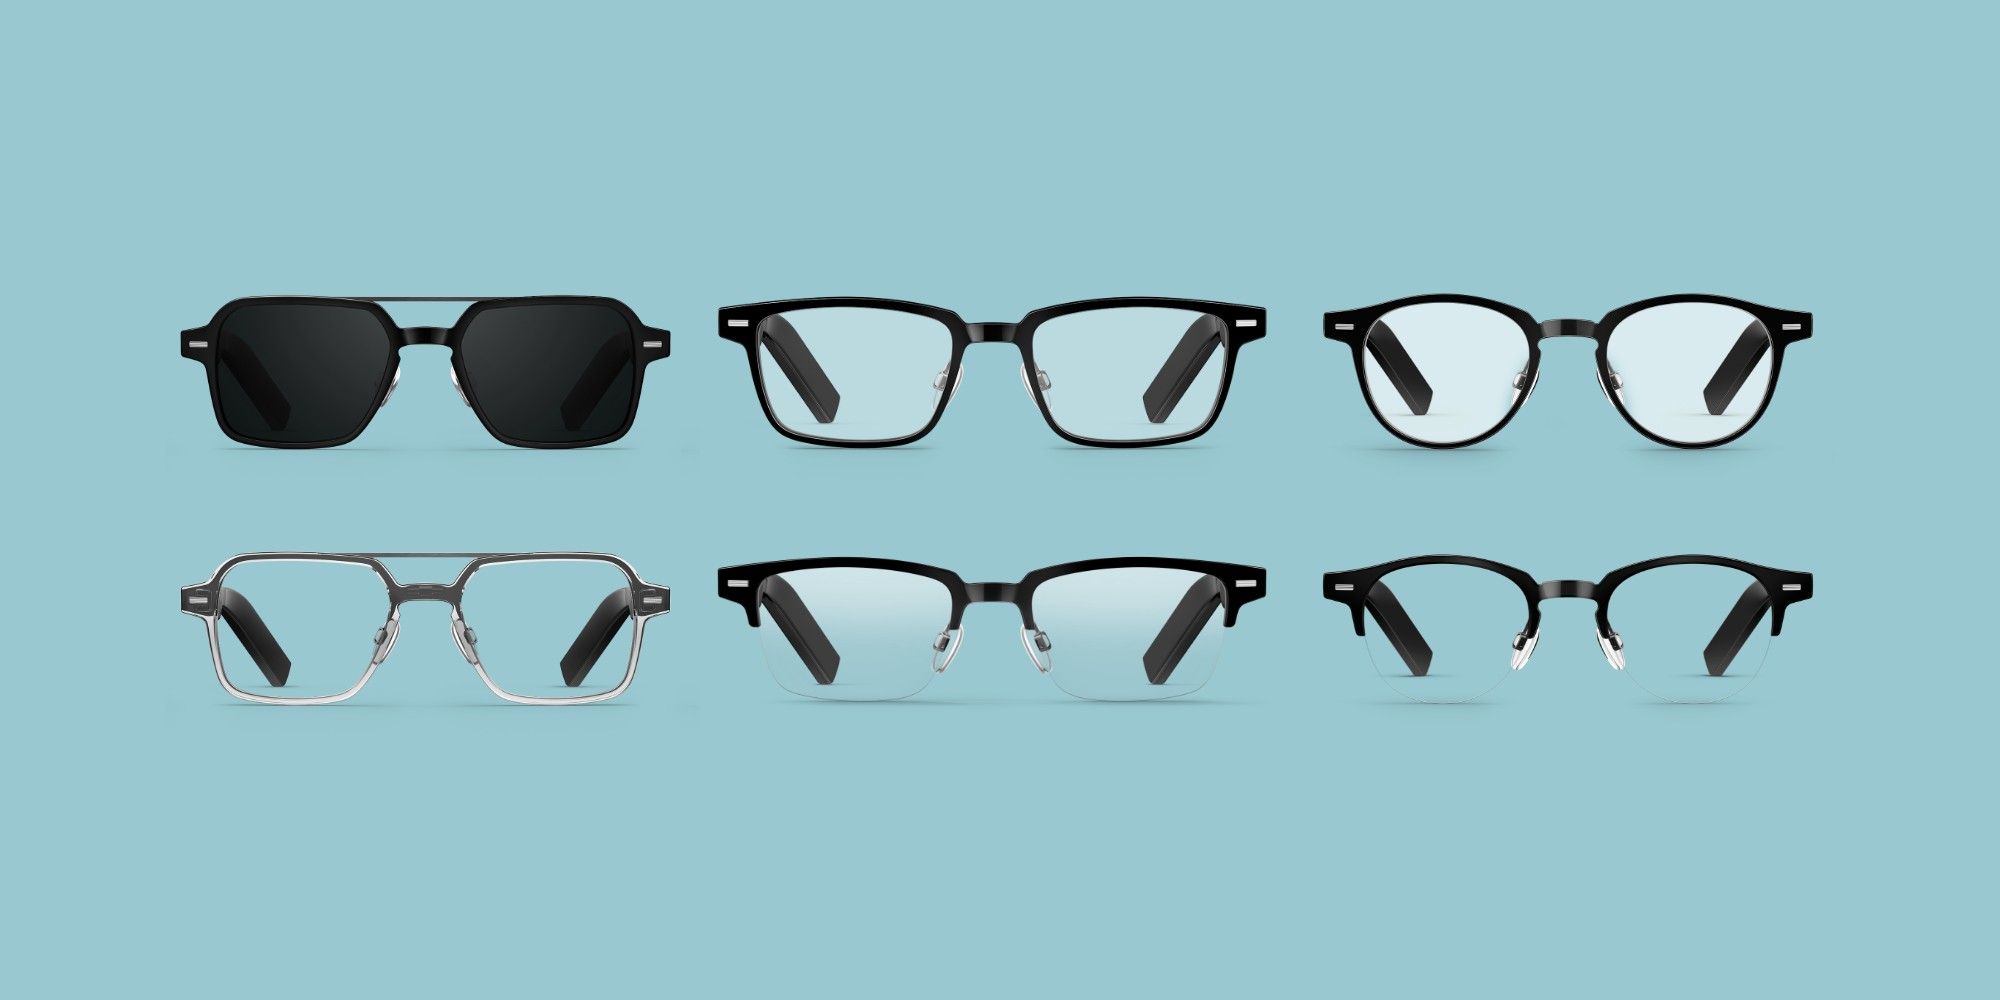 Huawei Eyewear comes in six styles with interchangeable frames